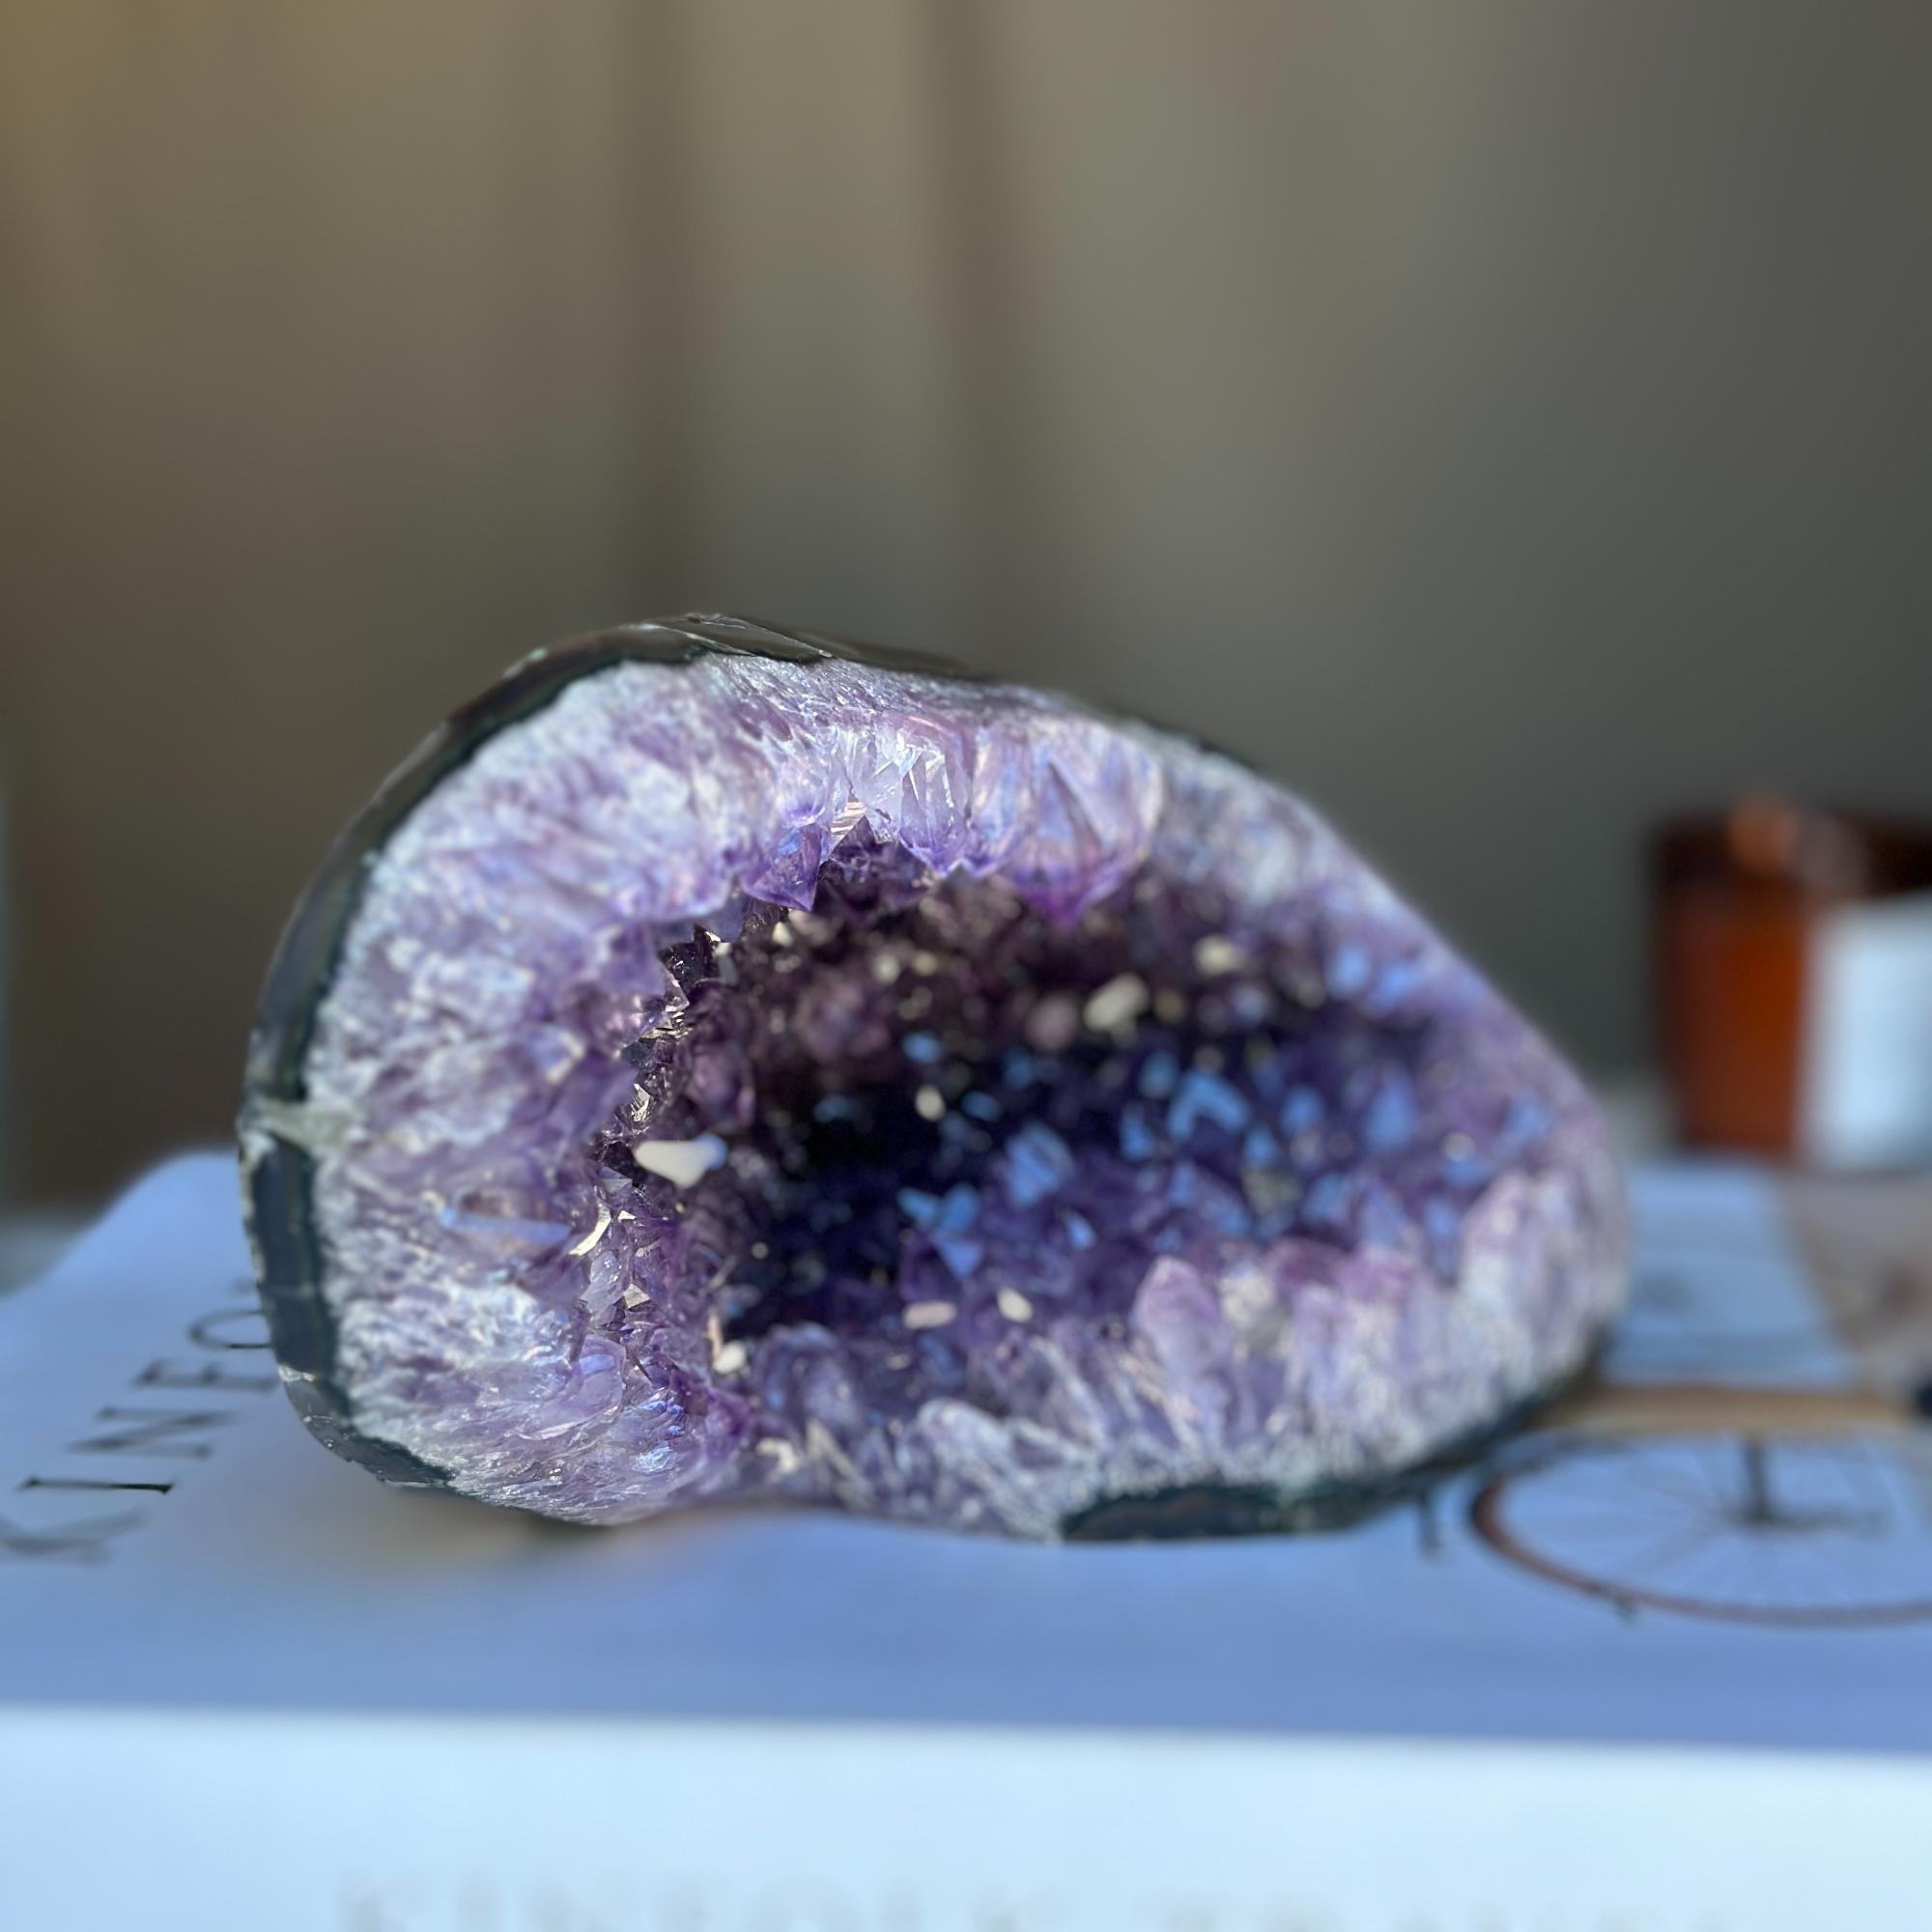 Amethyst Cave Geode with Agate Formations, Deep Purple Project Crystals for Home Decor